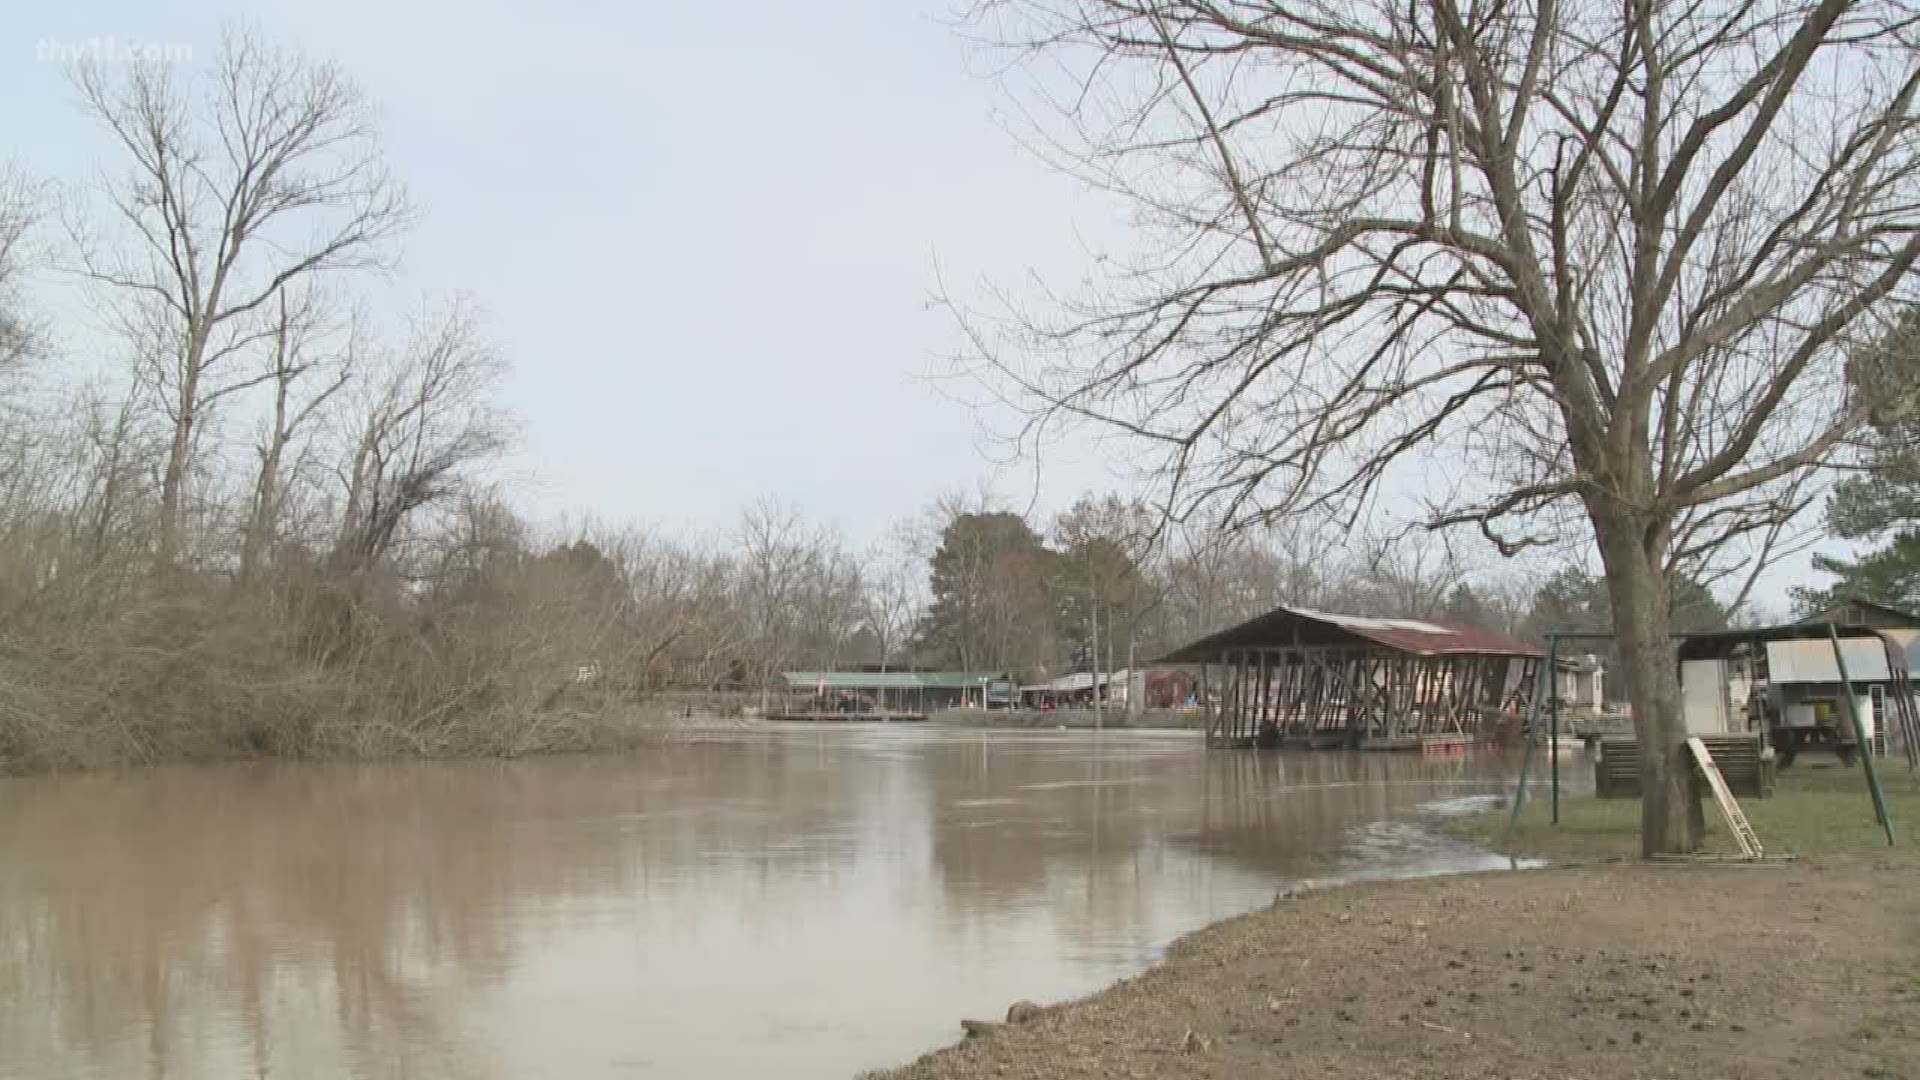 WITH HEAVY RAIN IN THE FORECAST AND THE RIVERS STILL RUNNING HIGH- WOODRUFF COUNTY IS WATCHING THE CACHE RIVER VERY CLOSELY.